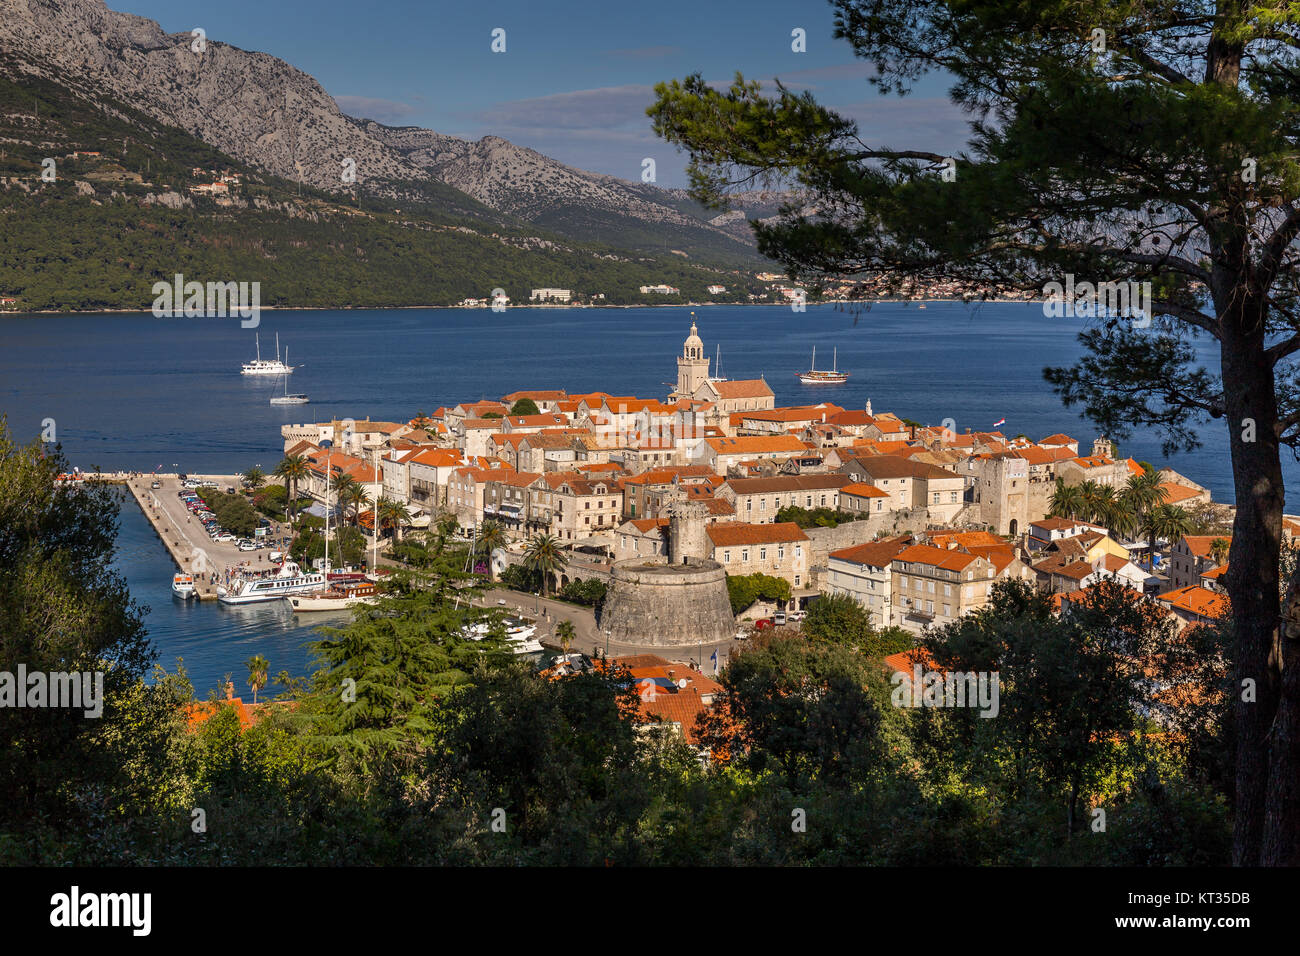 Korčula is a fortified pretty town surrounded by walls, on an island in the Adriatic Sea in Croatia. Stock Photo